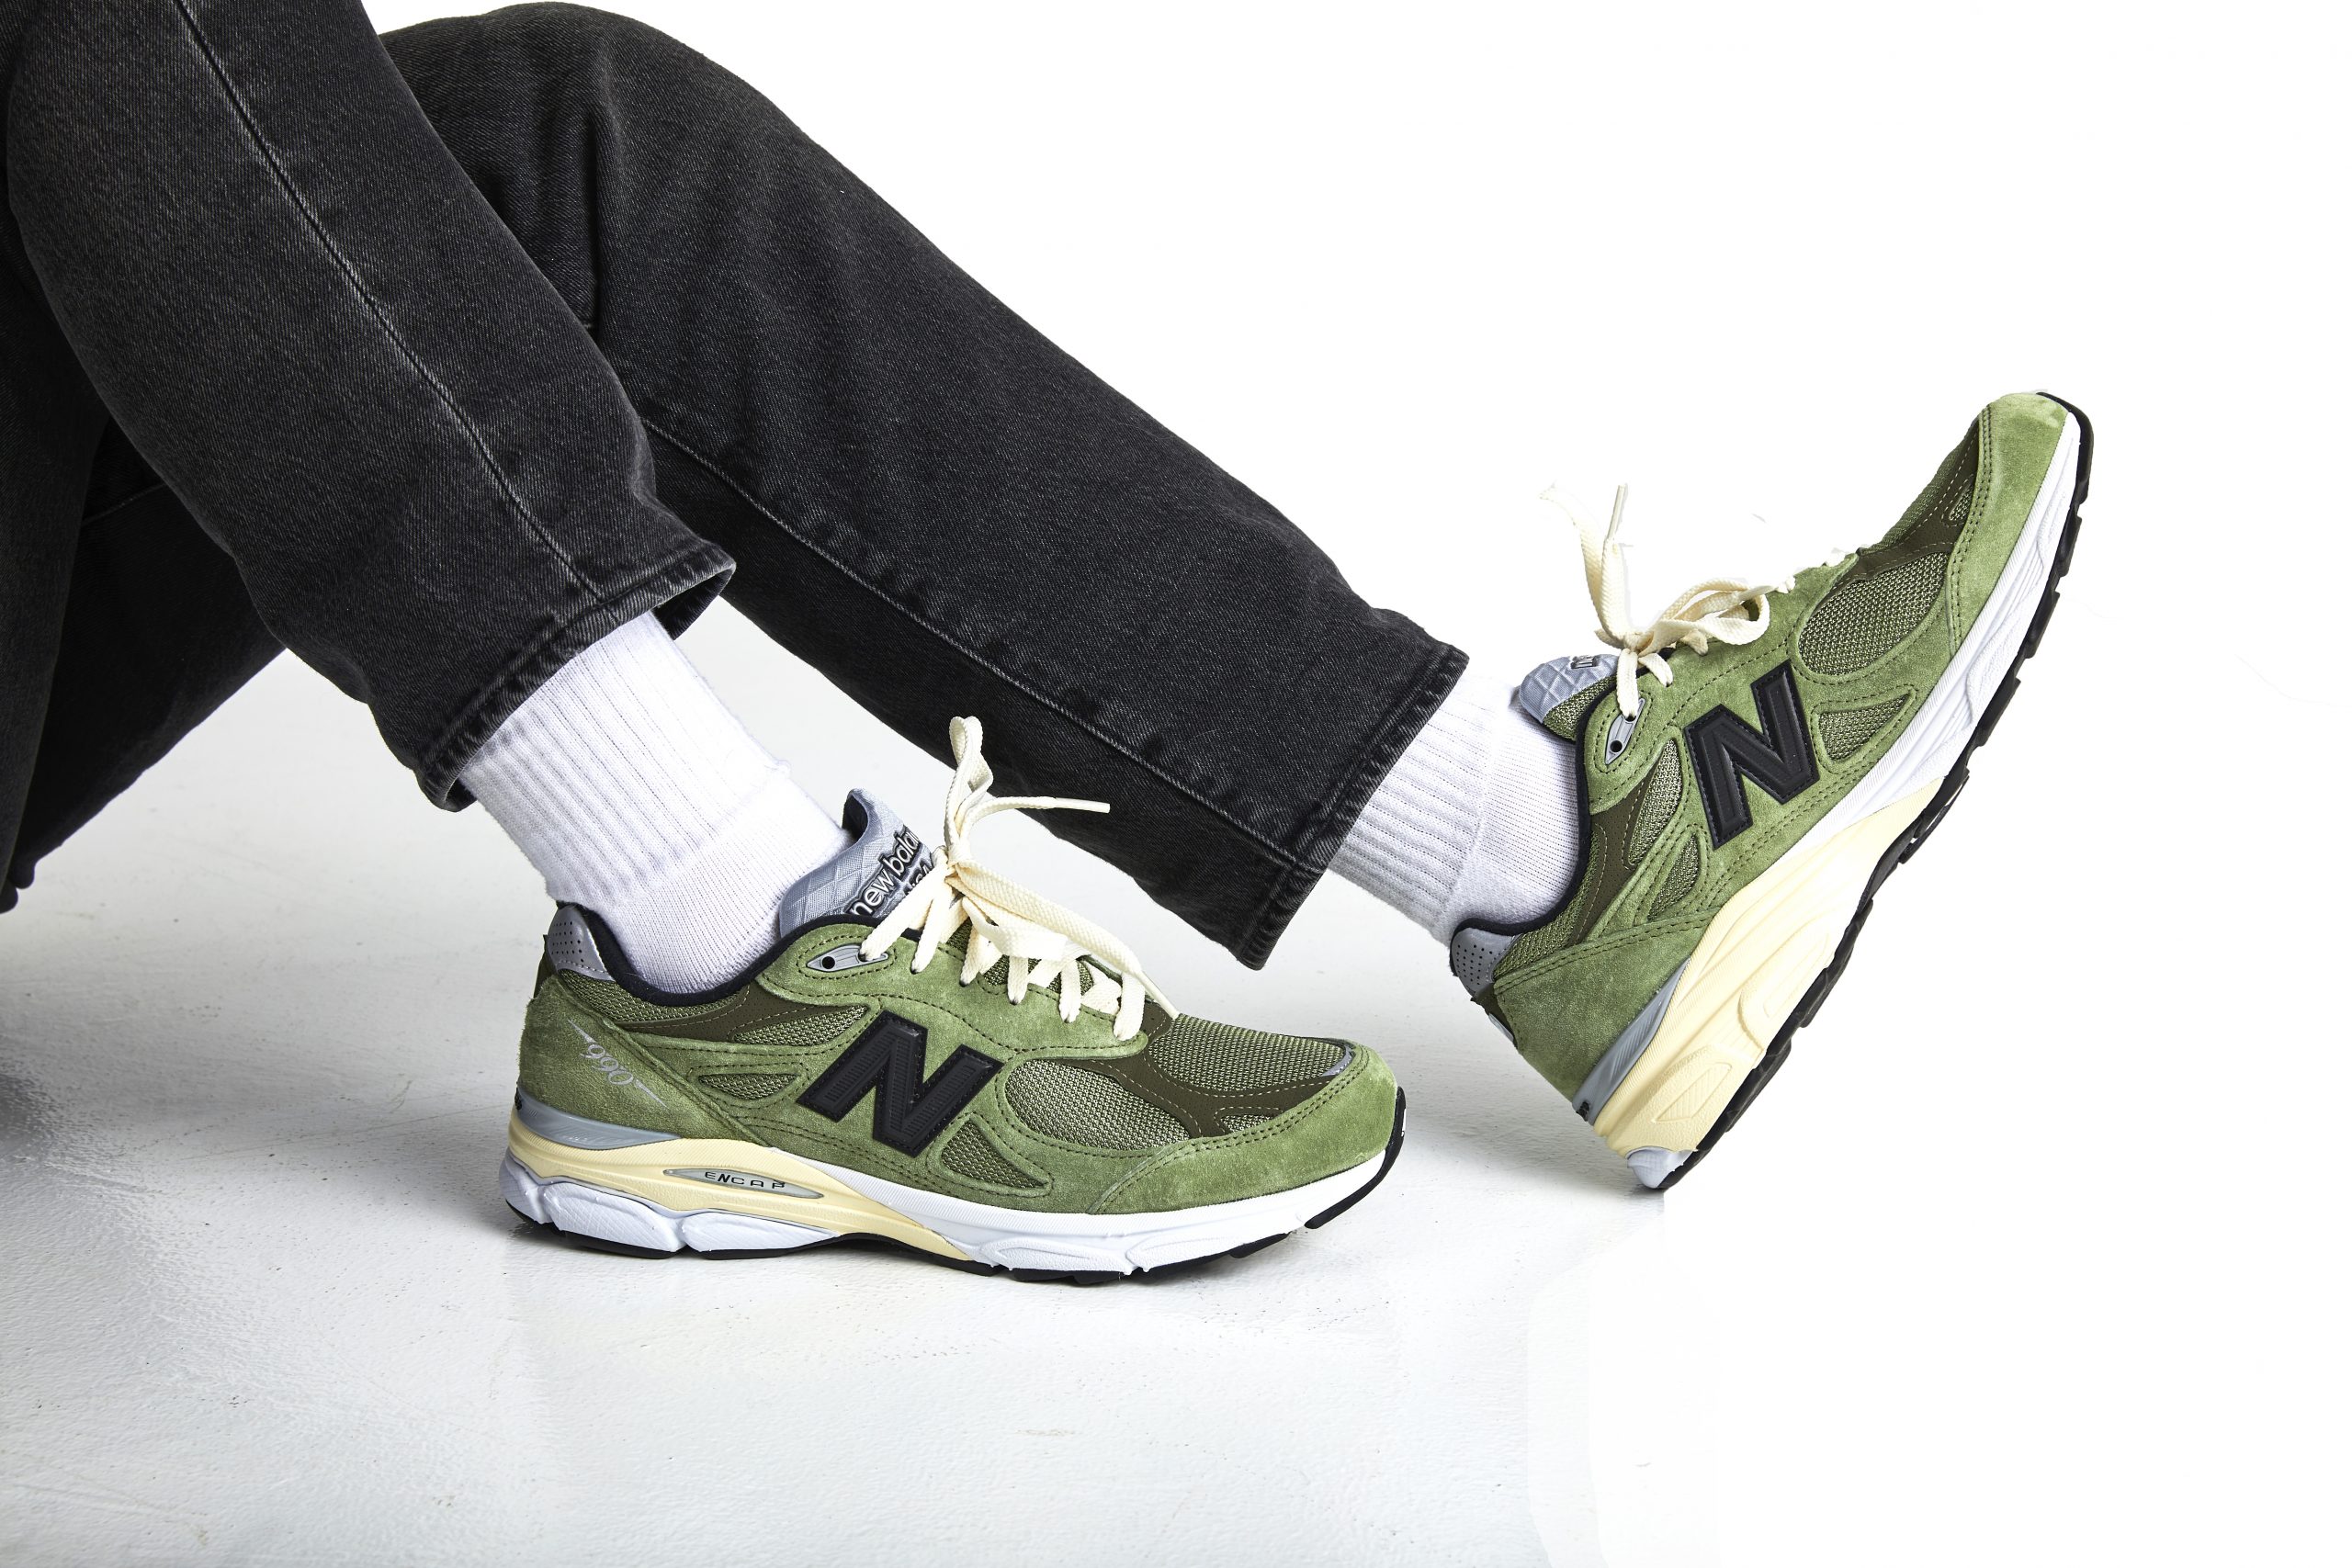 New Balance x JJJJound 990v3 Olive is a shoe of the year contender 